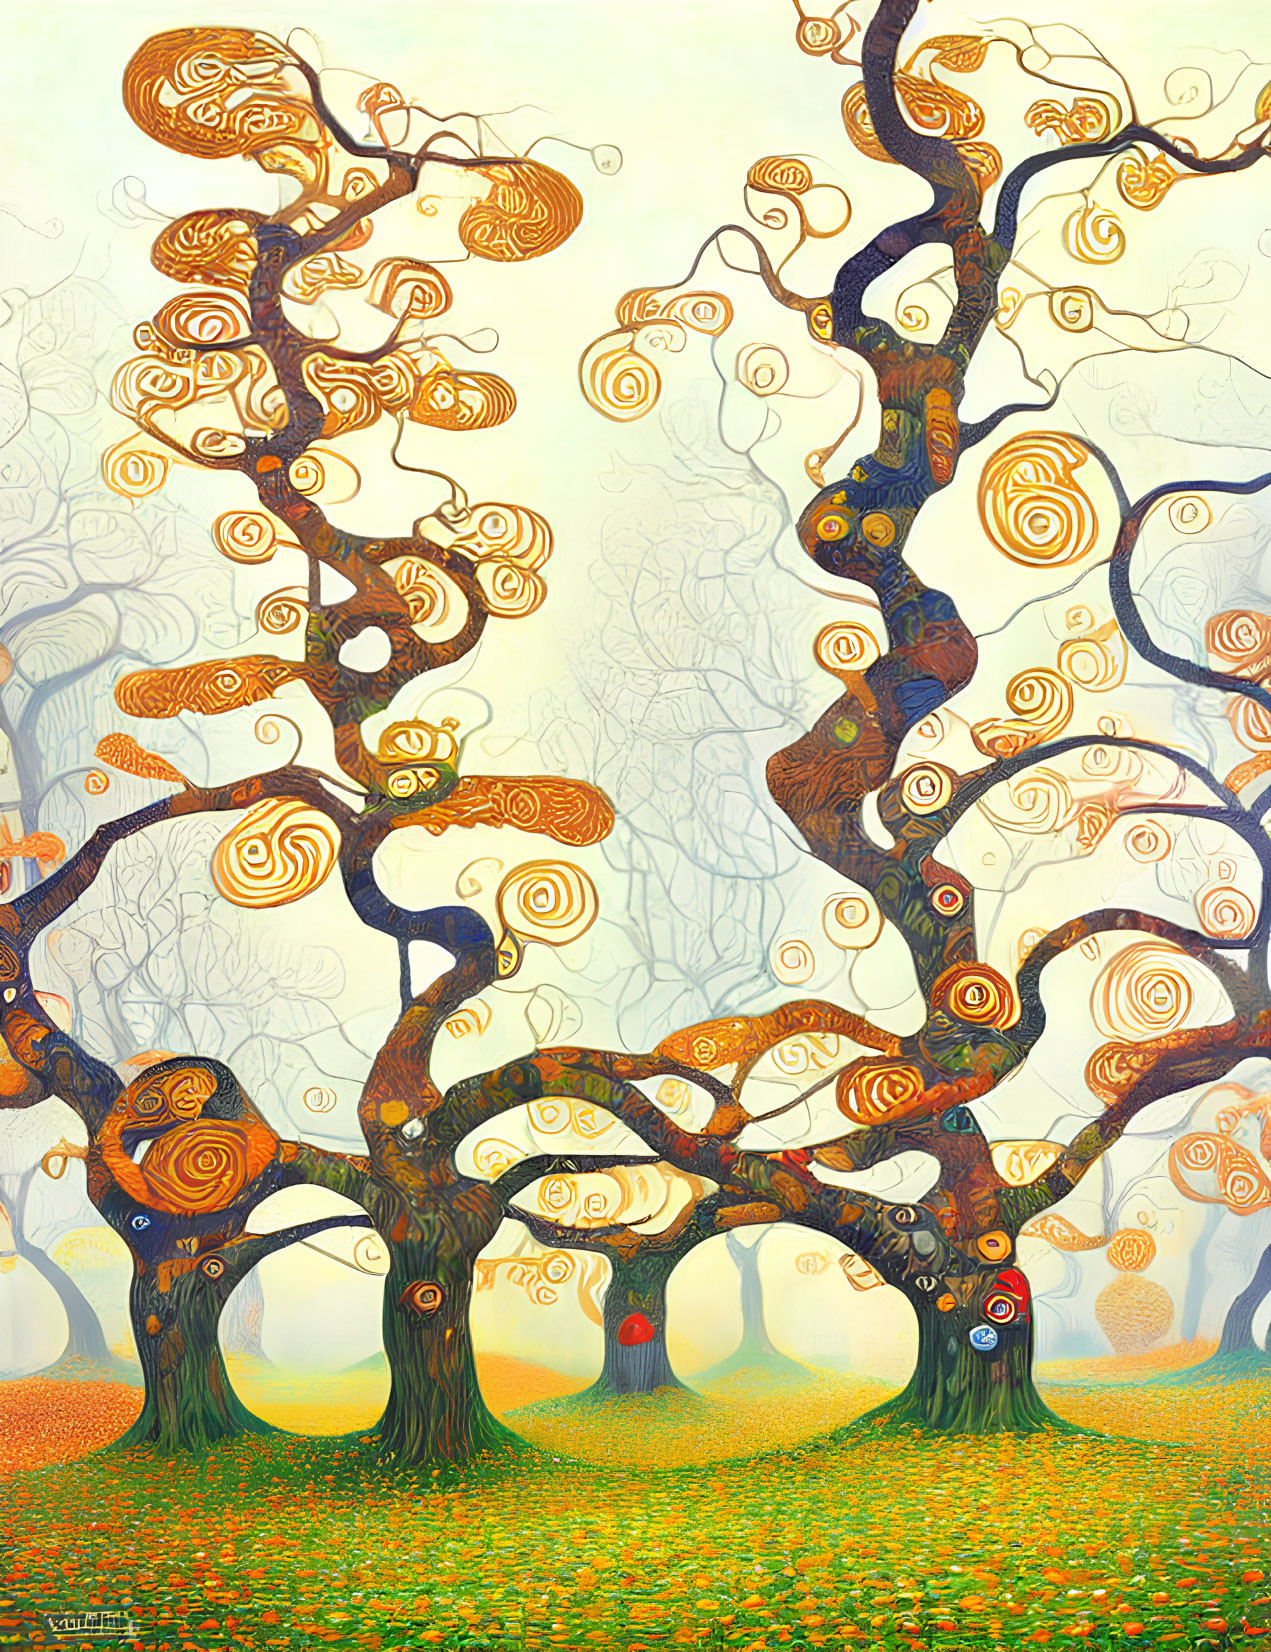 Twisted trees with spiral-patterned foliage in warm autumn hues